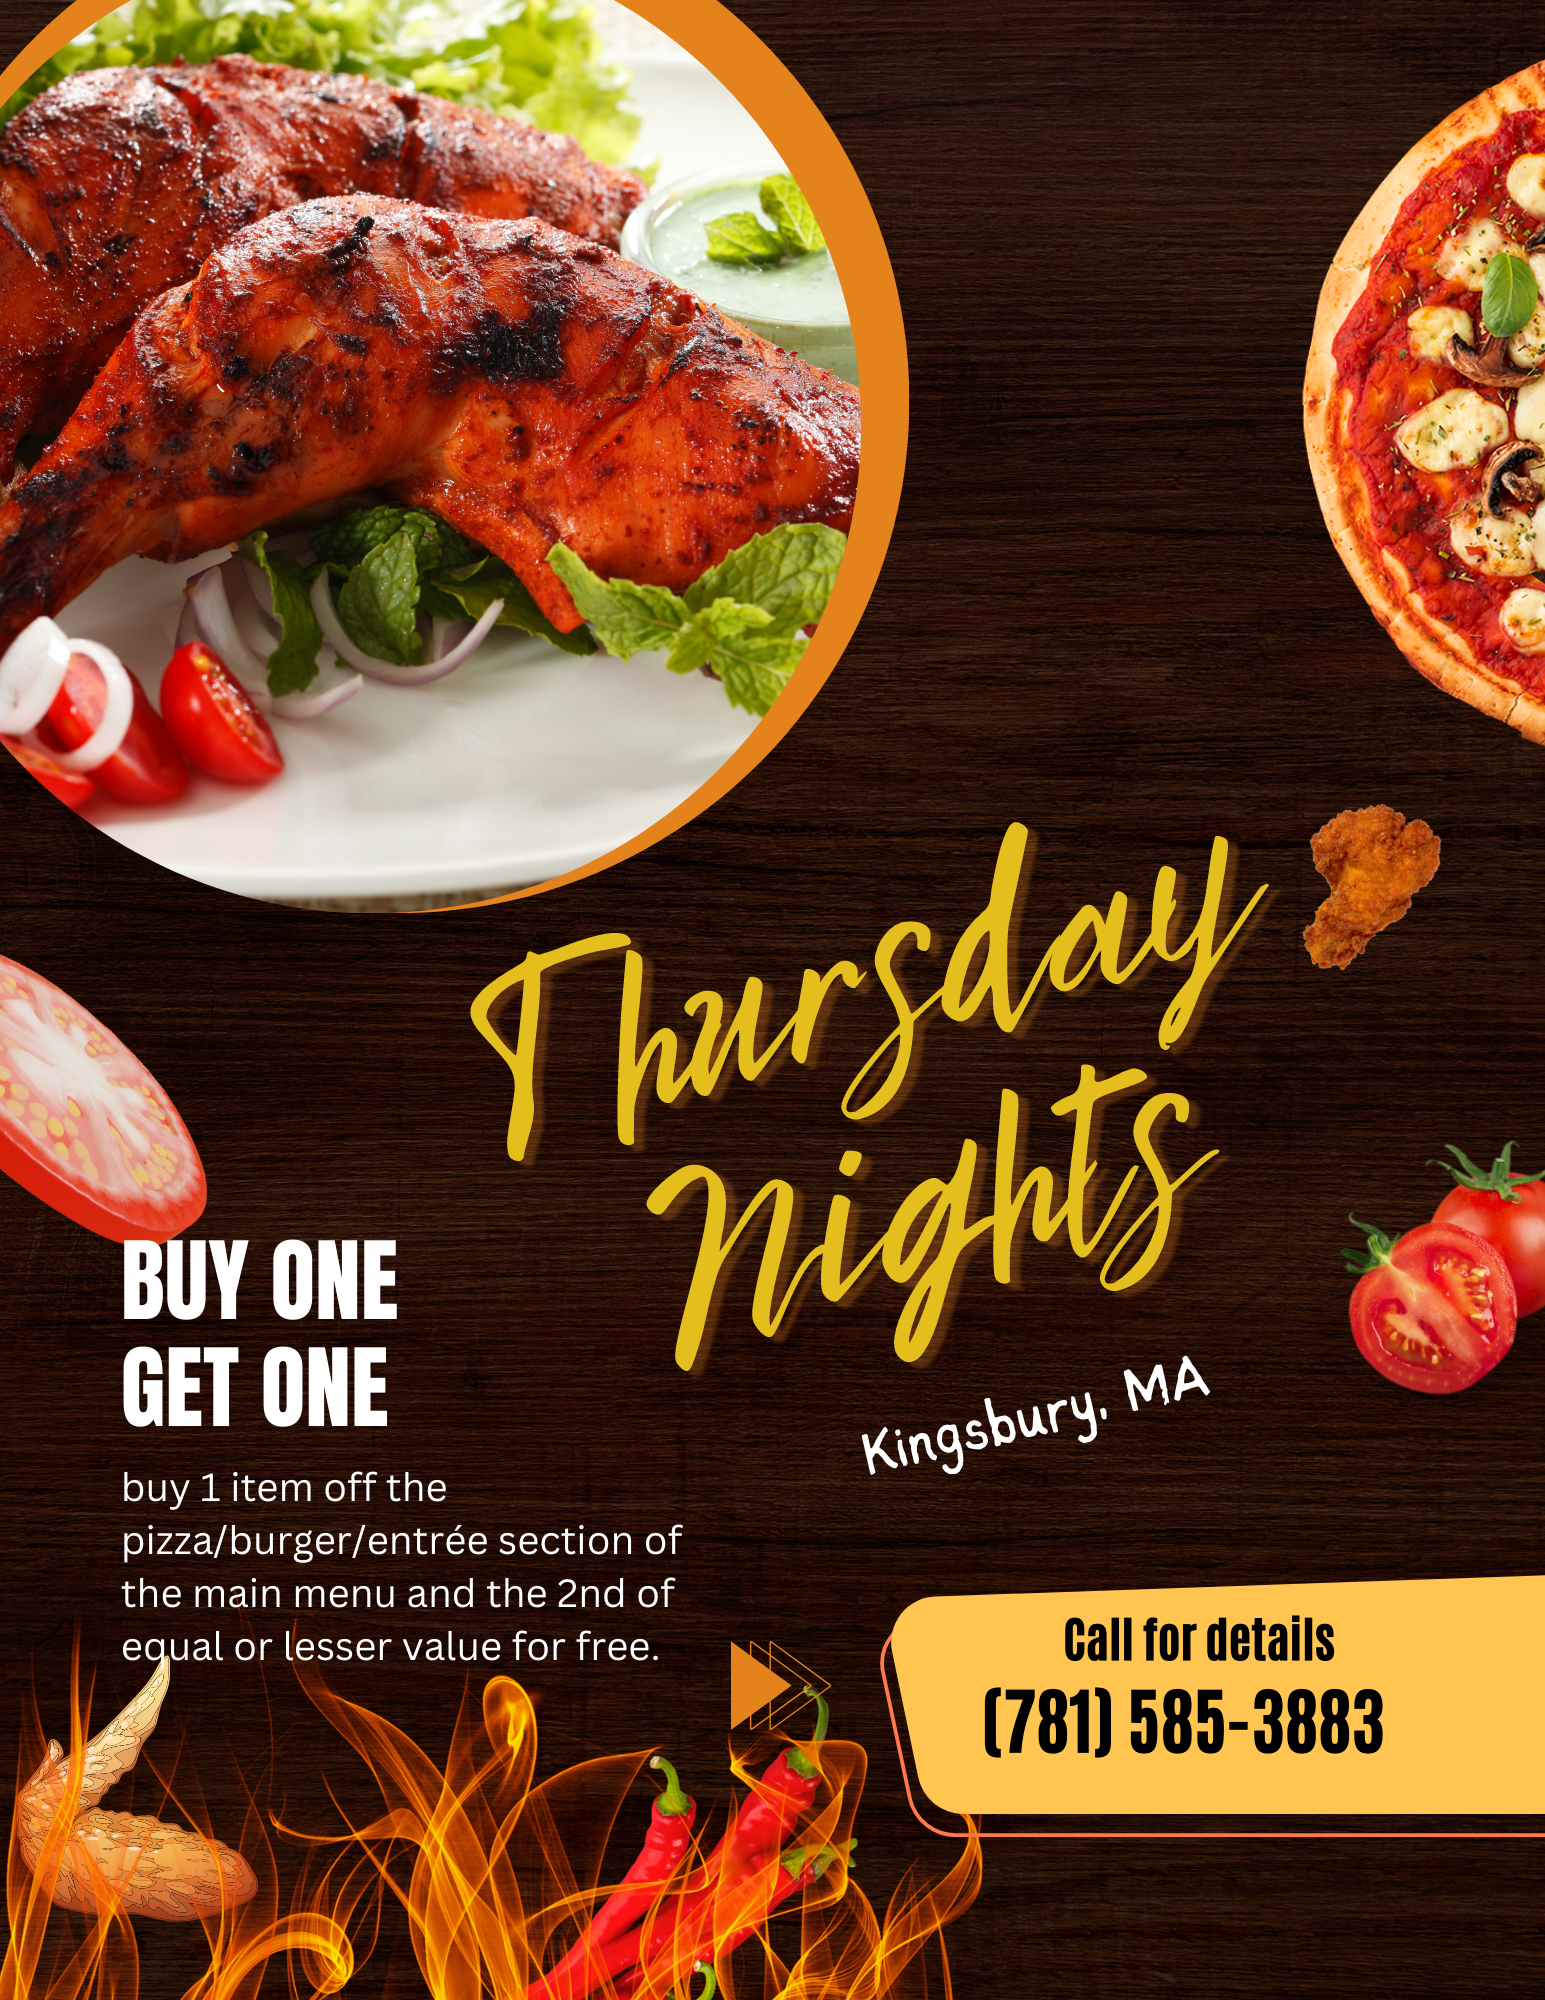 Buy One Get One Appetizer Promotion